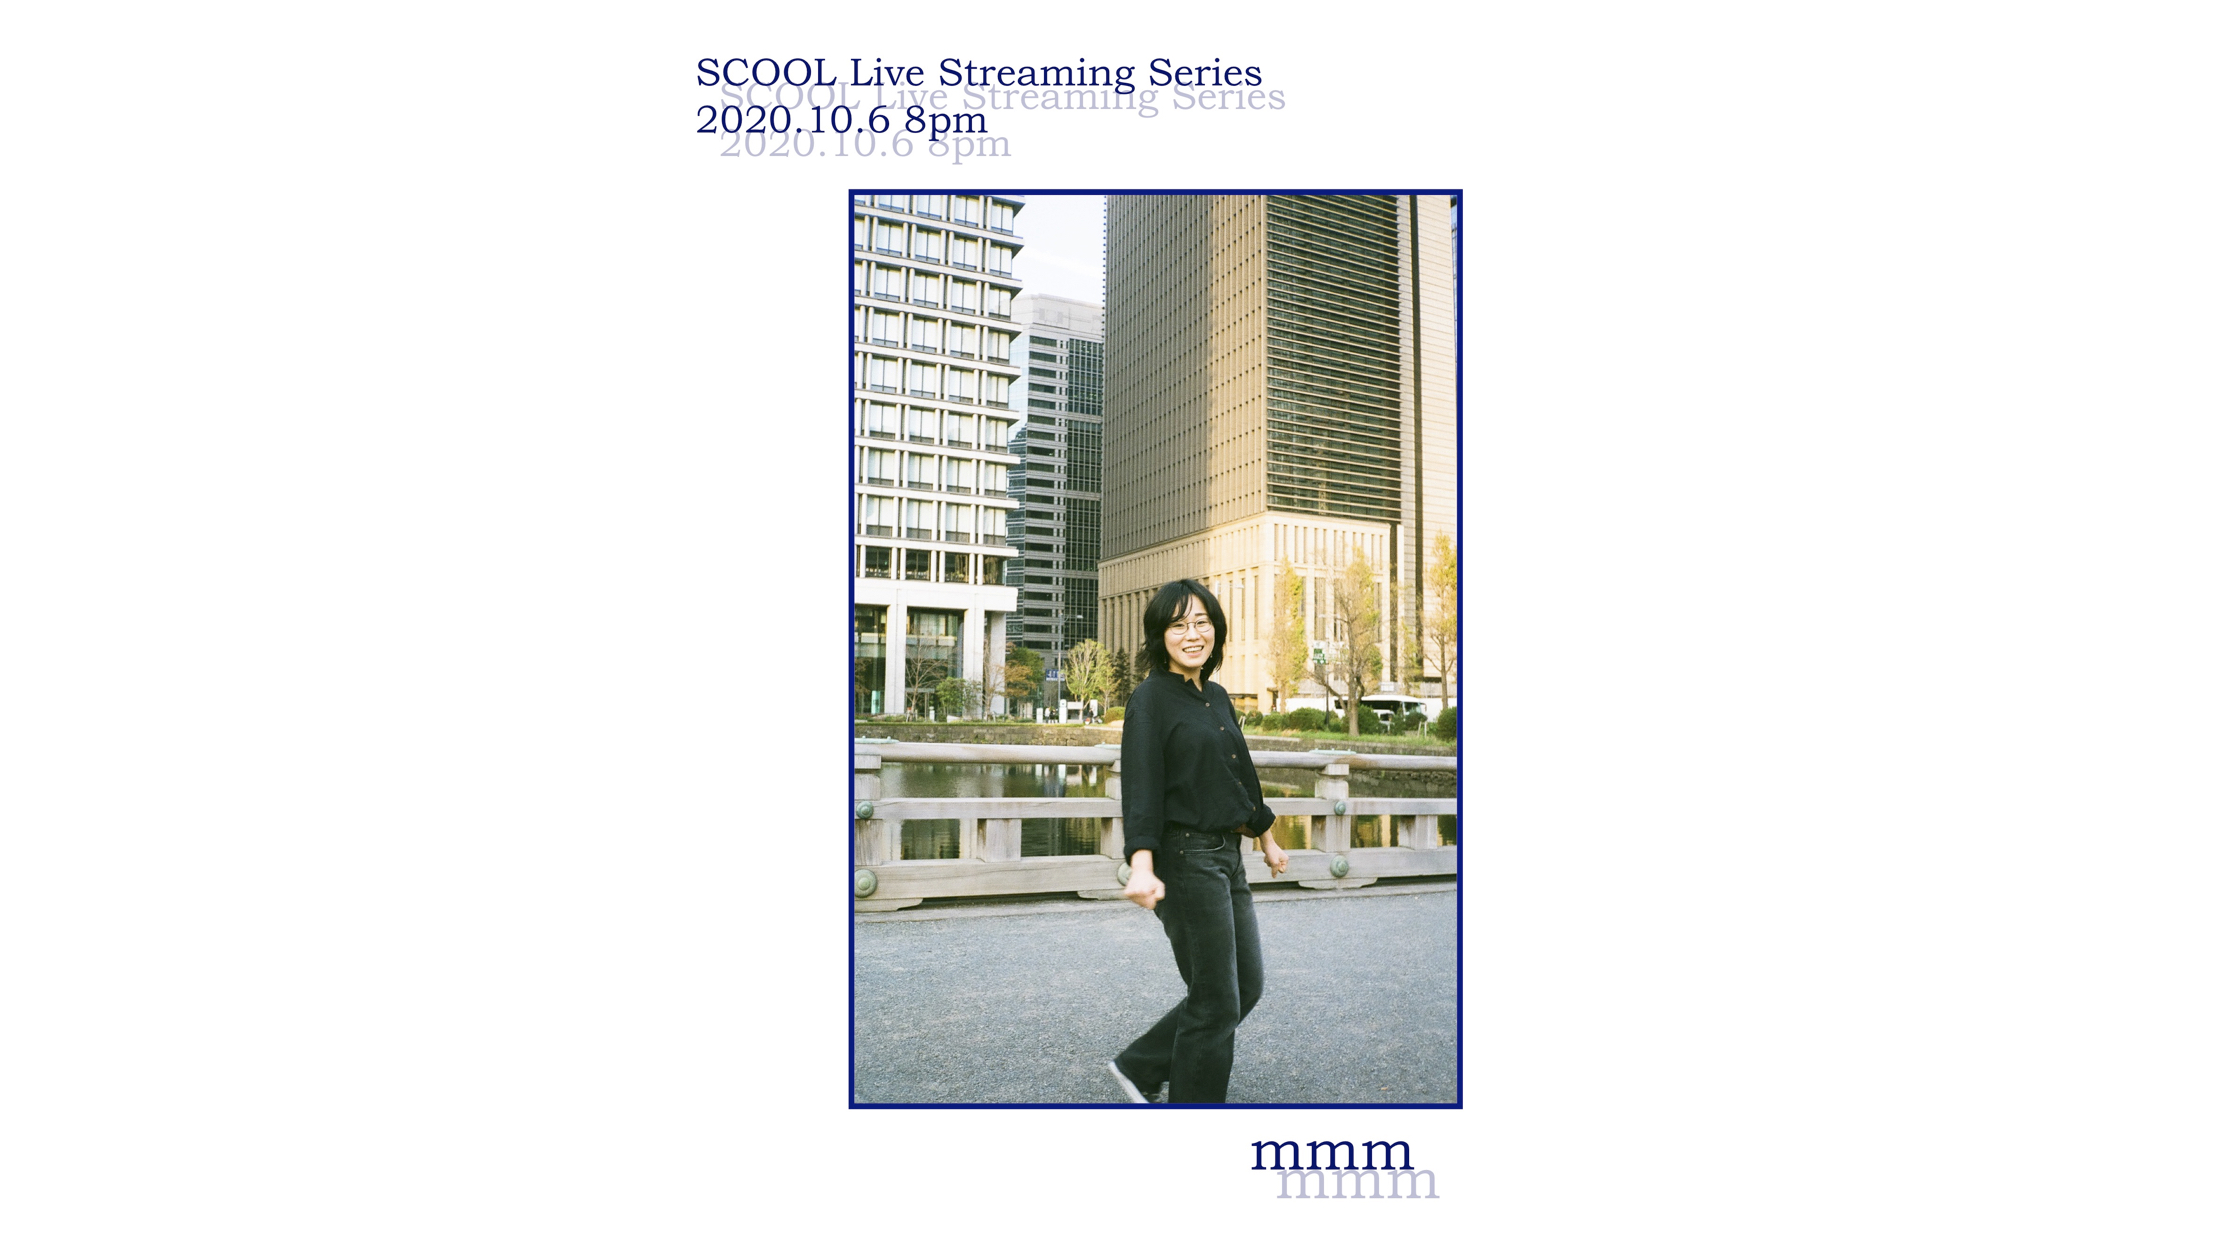 SCOOL Live Streaming Series<br>mmm